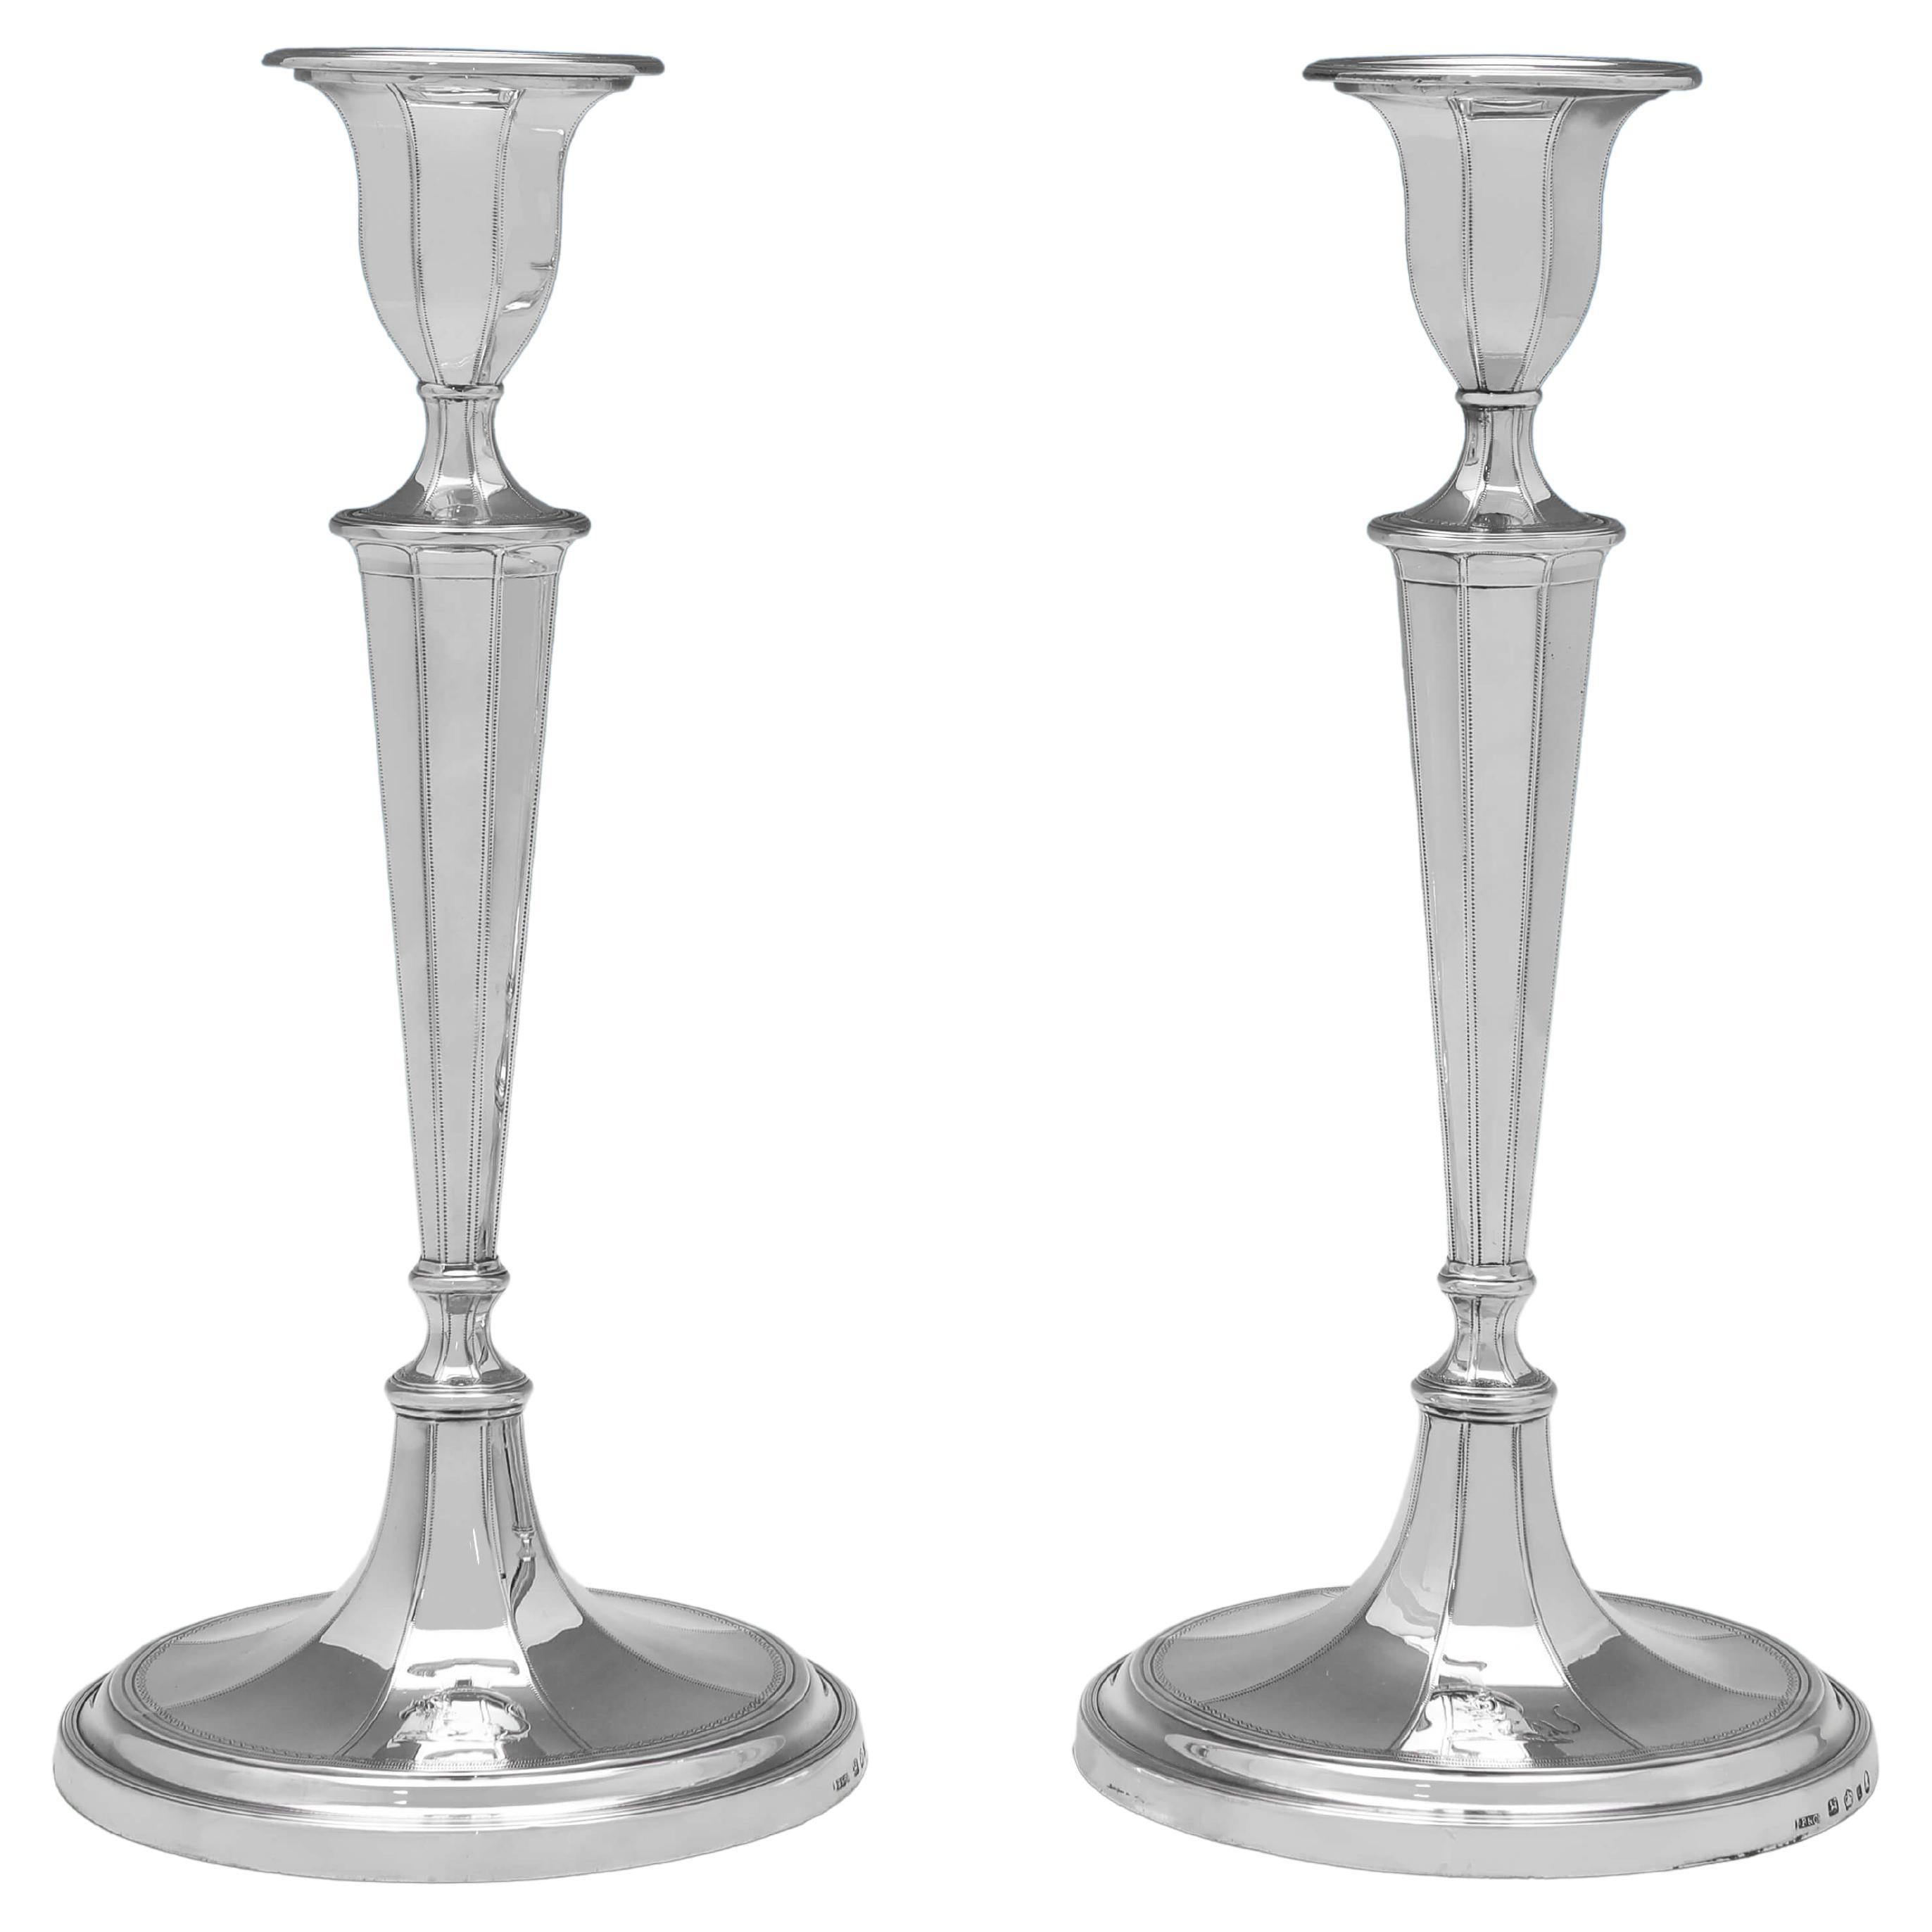 Neoclassical George III Period Pair of Candlesticks - Hallmarked in 1790